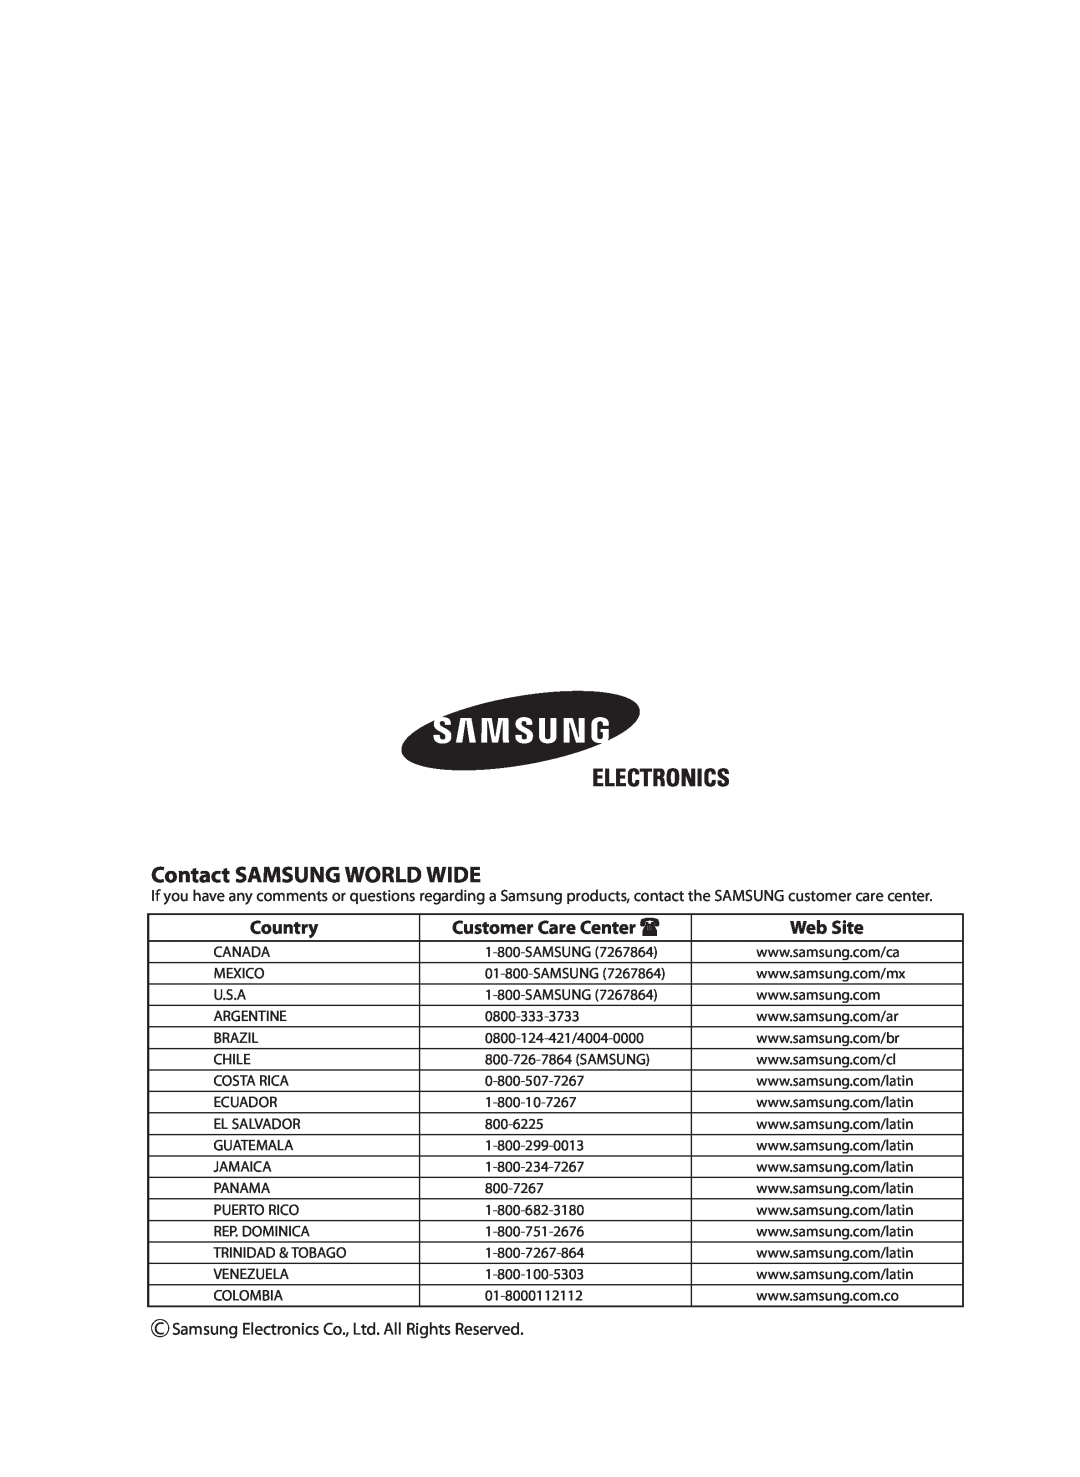 Samsung AVMHH, AVMDH user manual Contact SAMSUNG WORLD WIDE, Country, Customer Care Center, Web Site 